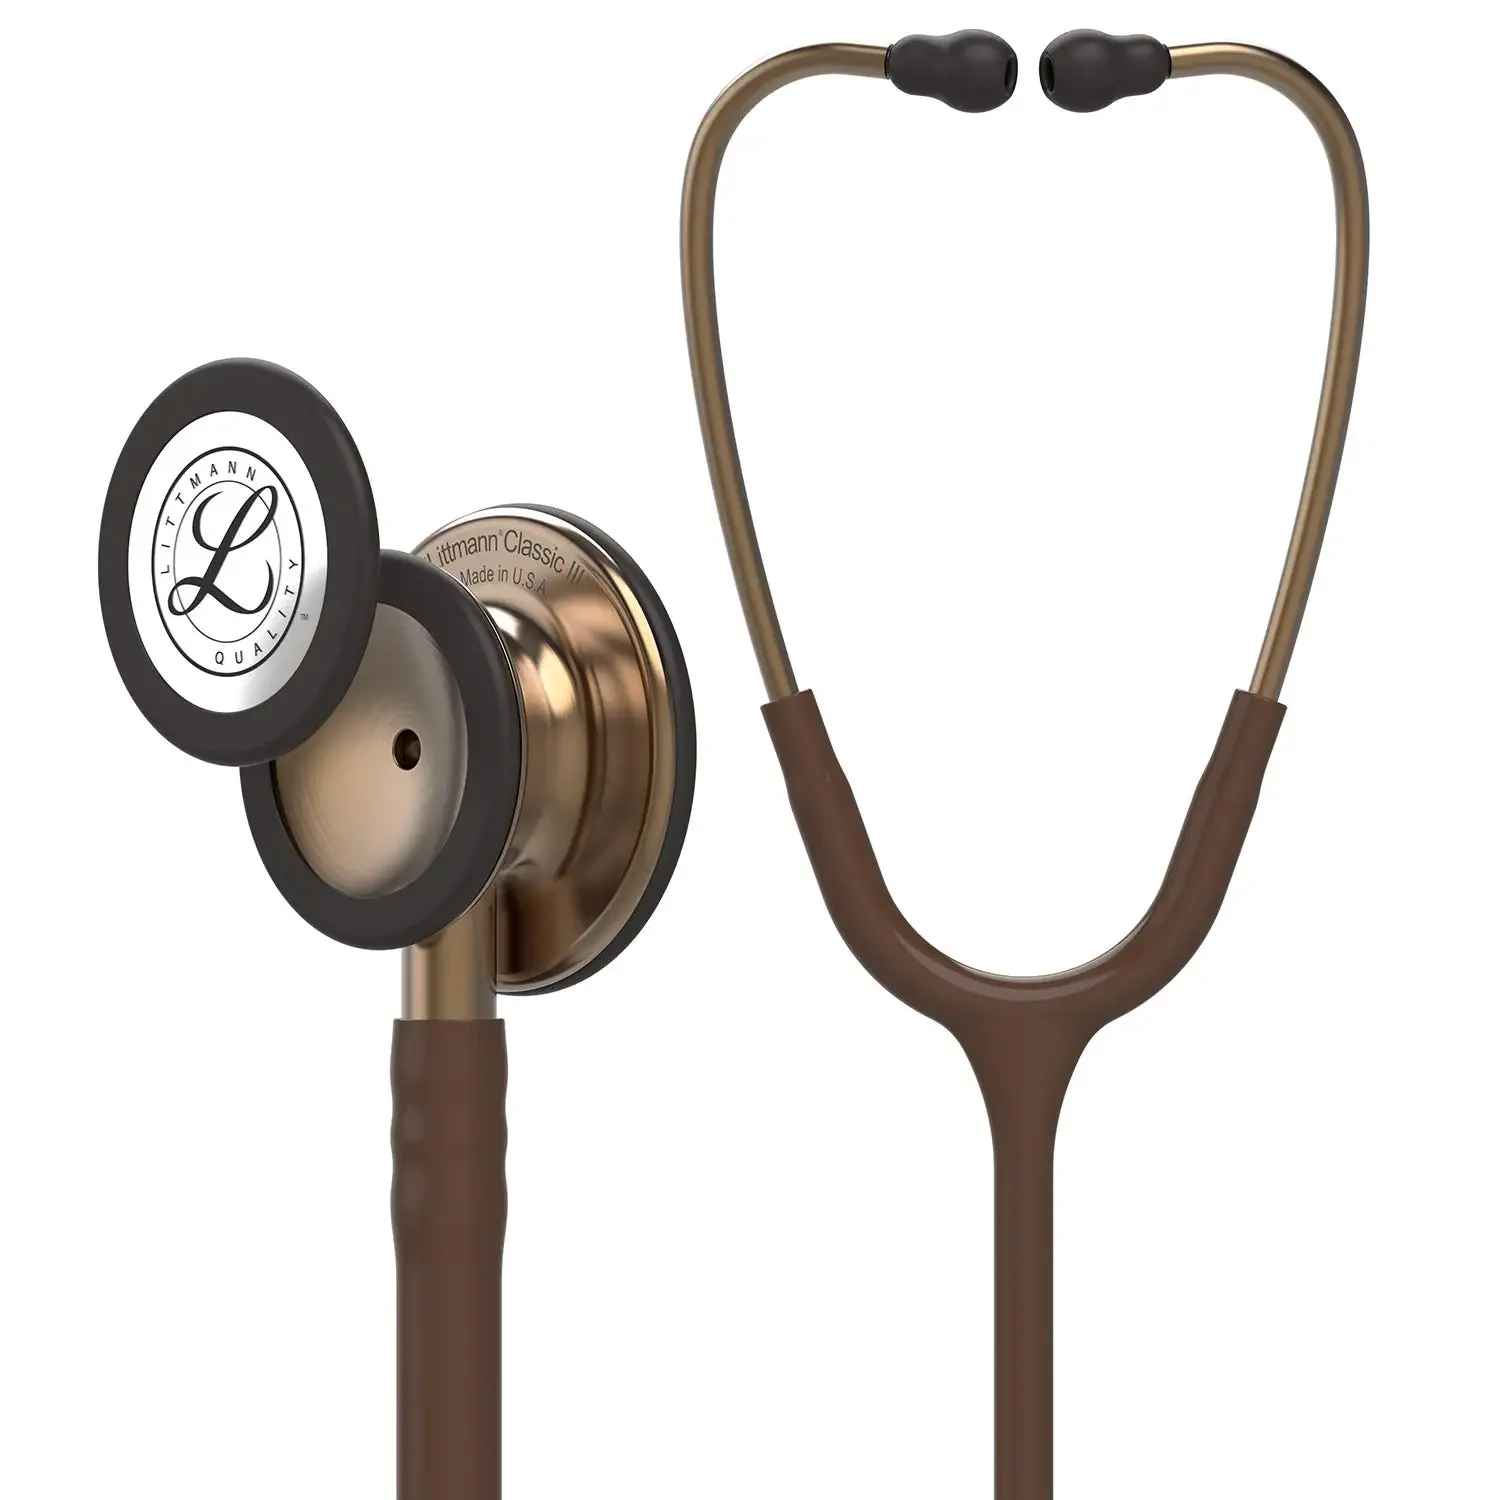 

3M Littmann Classic III Monitoring Stethoscope 5809 Chocolate Gold Tube Stainless Stem and Headset For Doctor Nurse Health Care